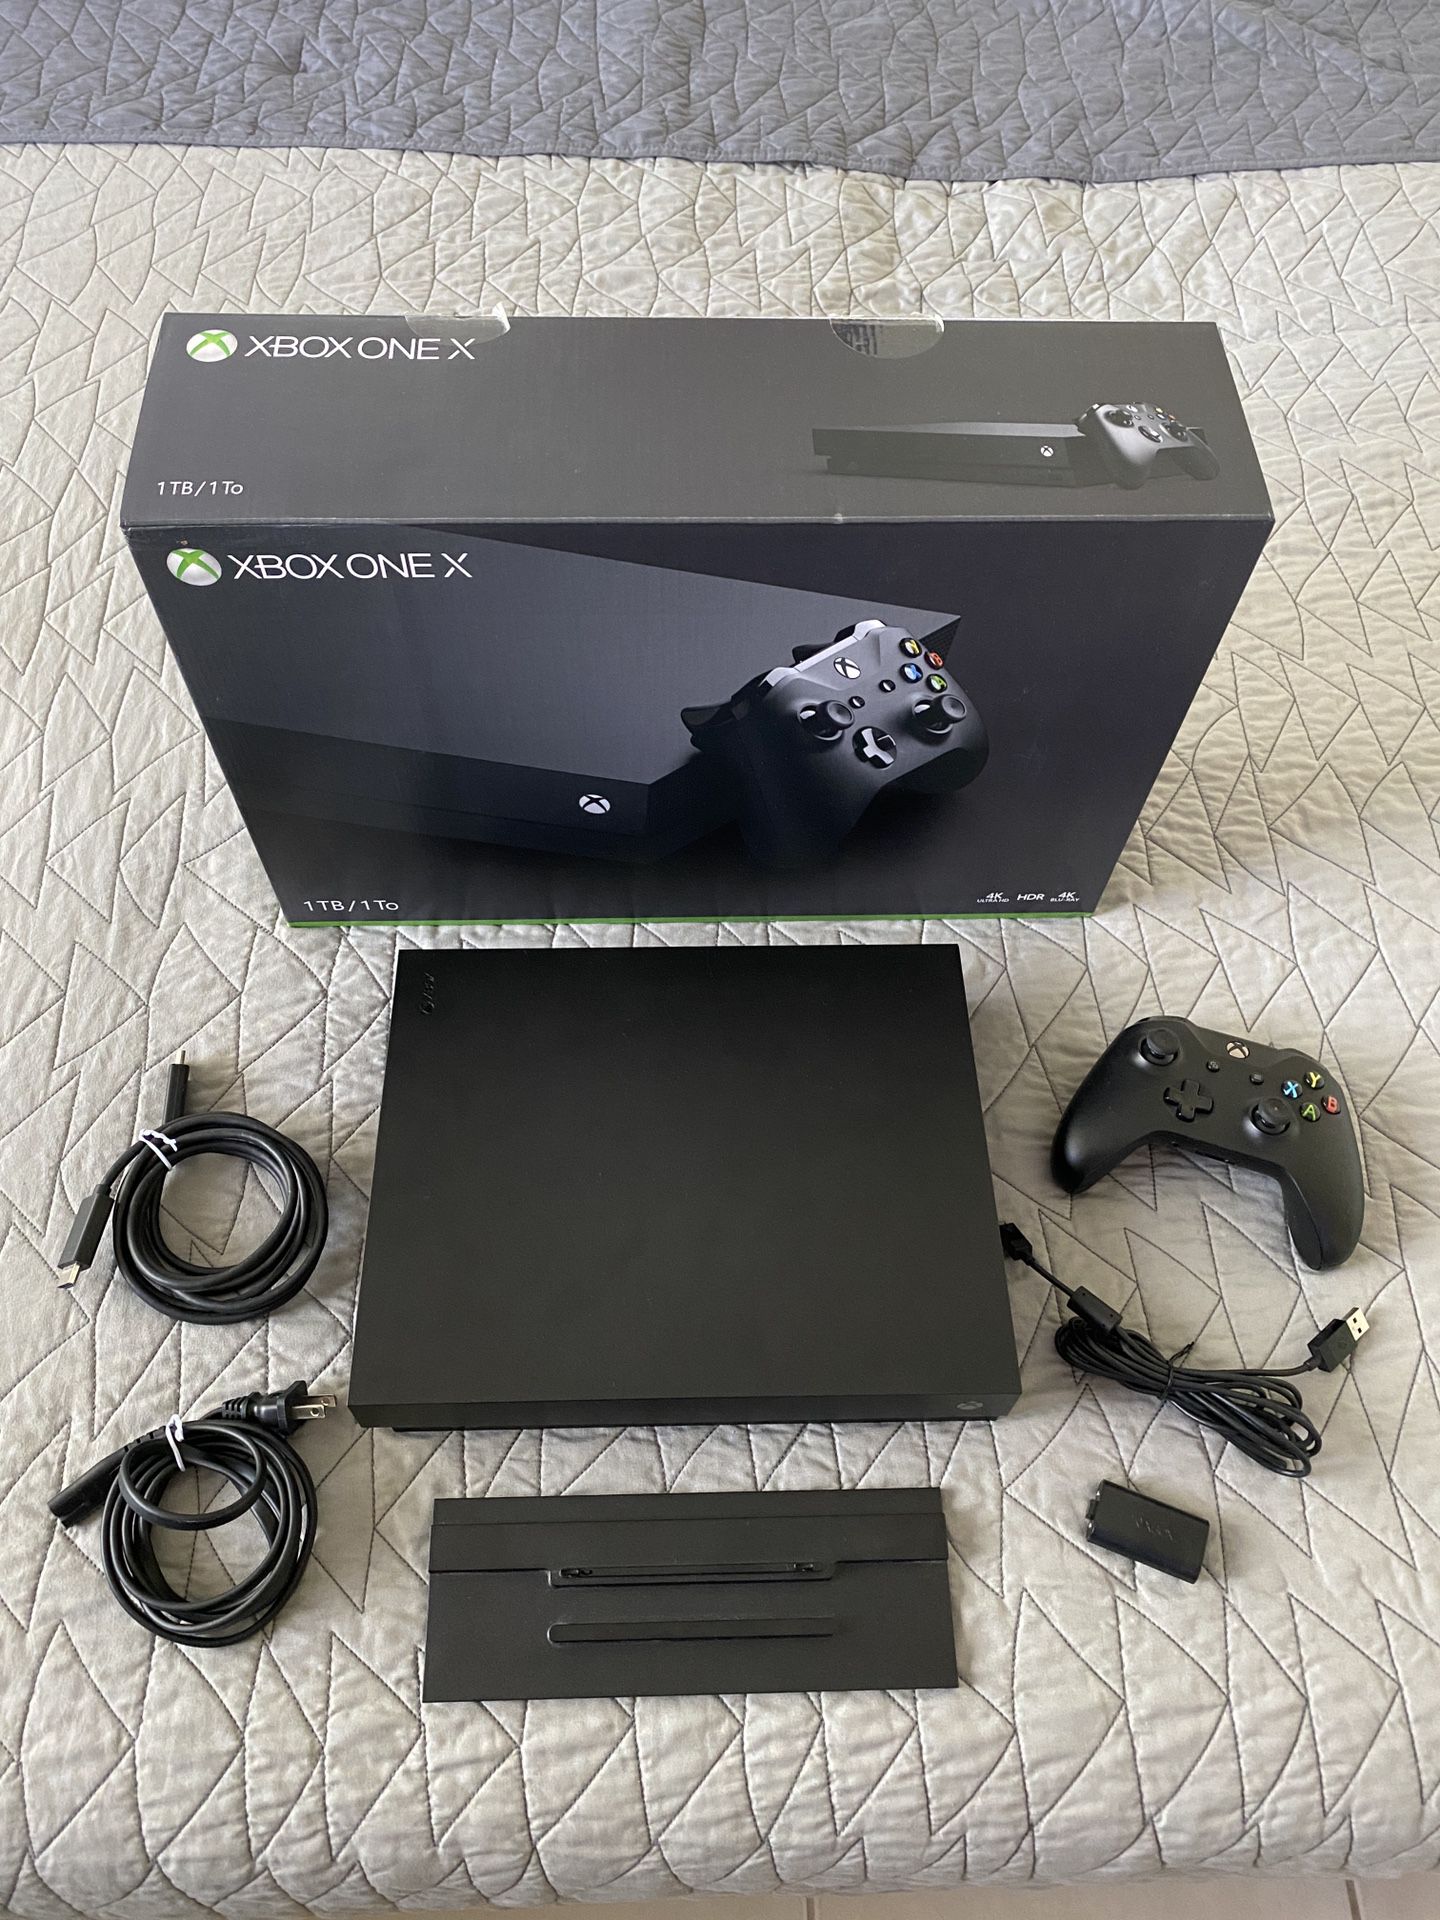 XBOX ONE X with original box and accessories.